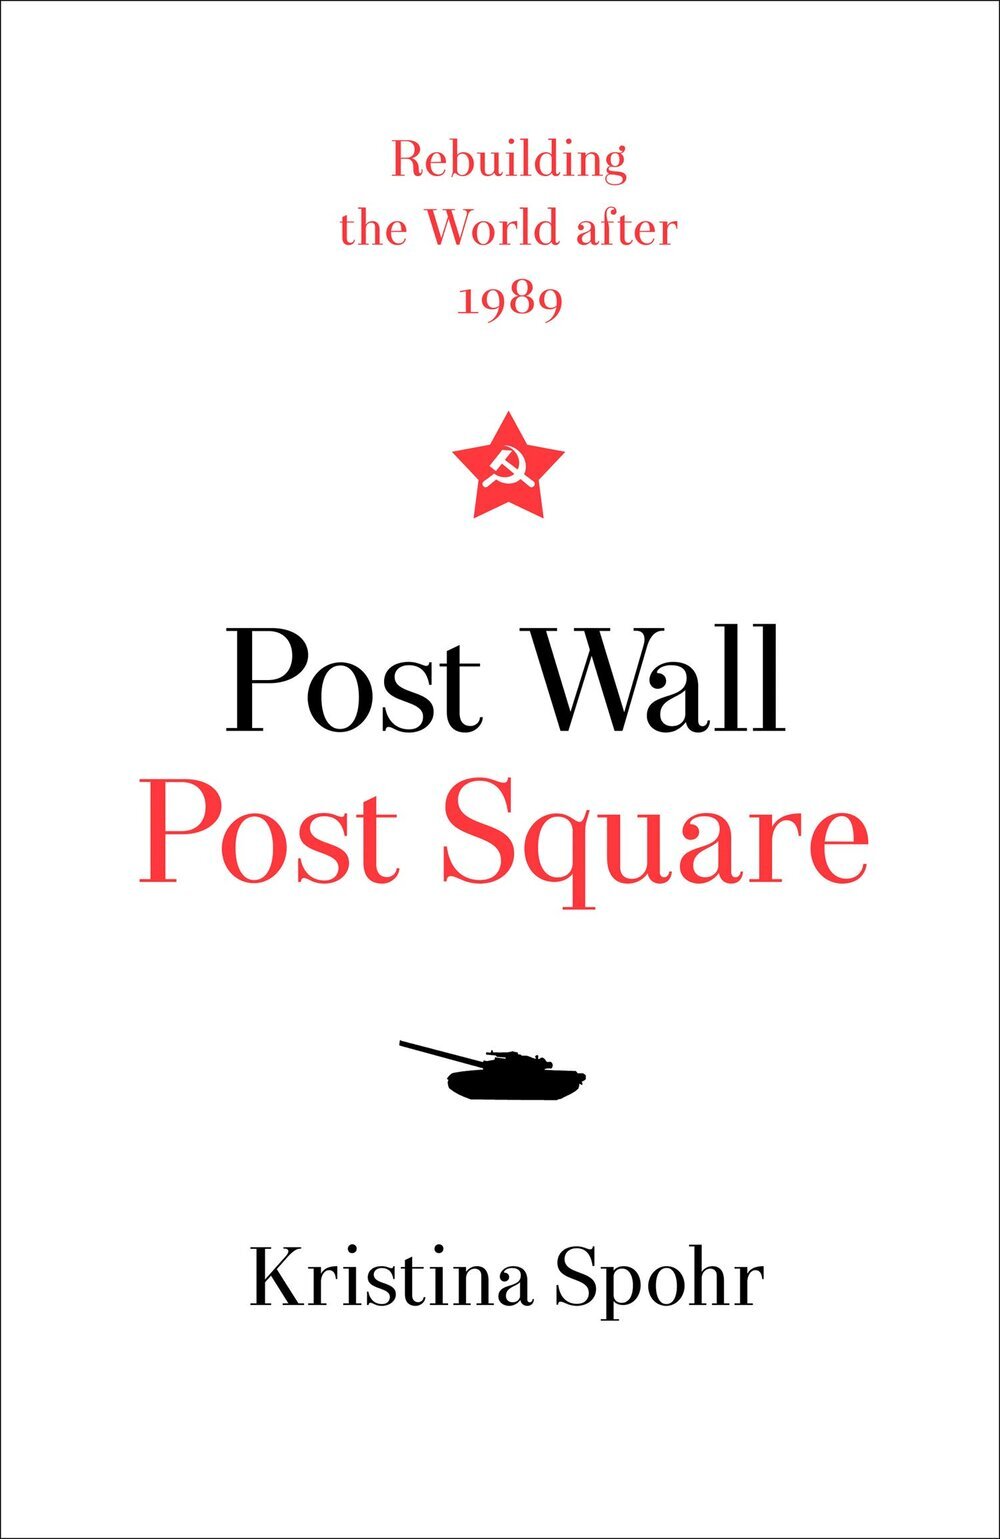 Best of History Post Wall Post Square Rebuilding the World After 1989 by Kristina Spohr.jpg